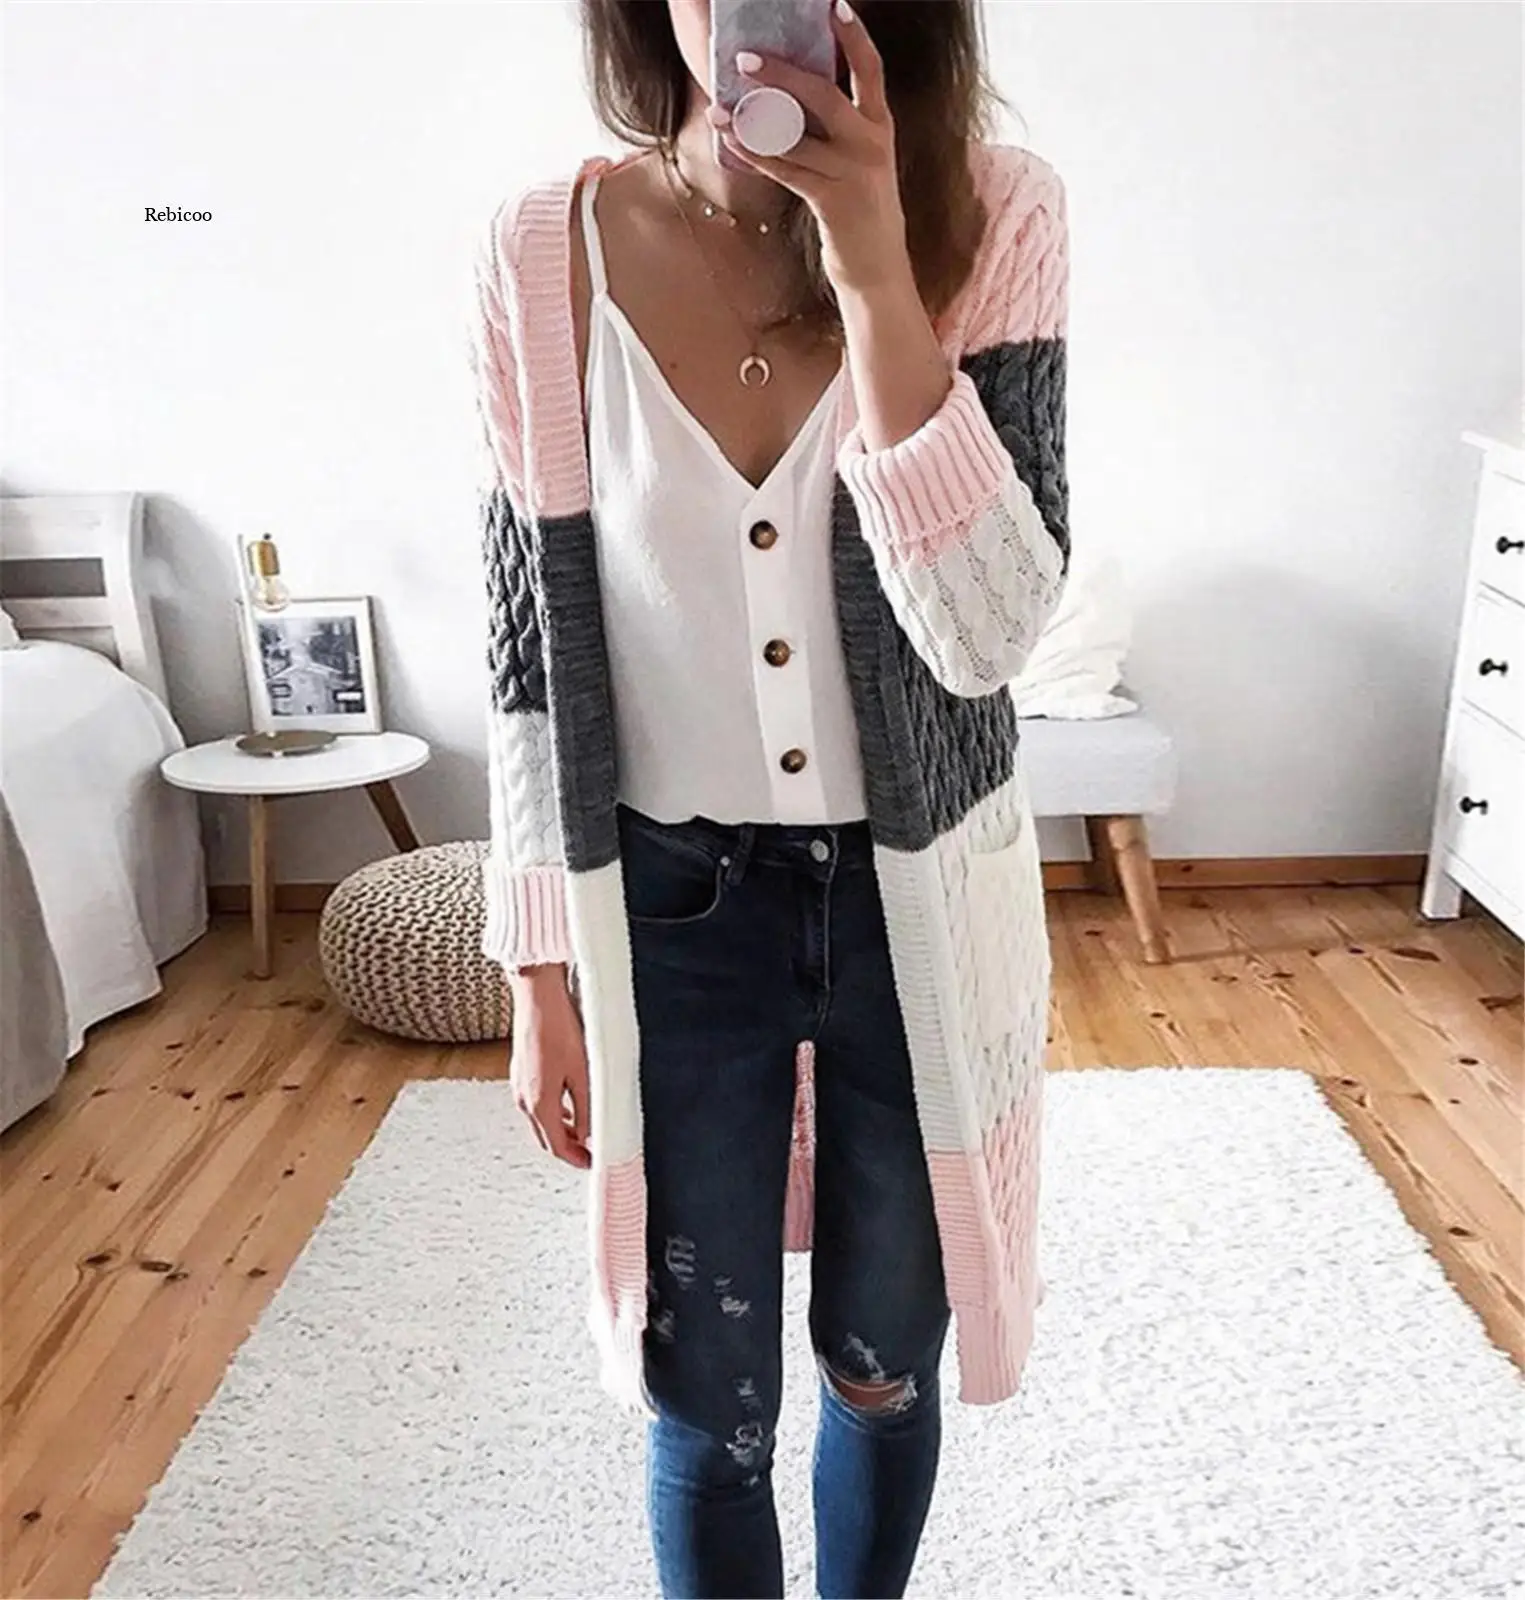 

Women Solid Color Contrast Long Sleeve Pocket Outerwear Sweater Cardigan Jacket Fashion Daily High Quality Coat Fast Shipping